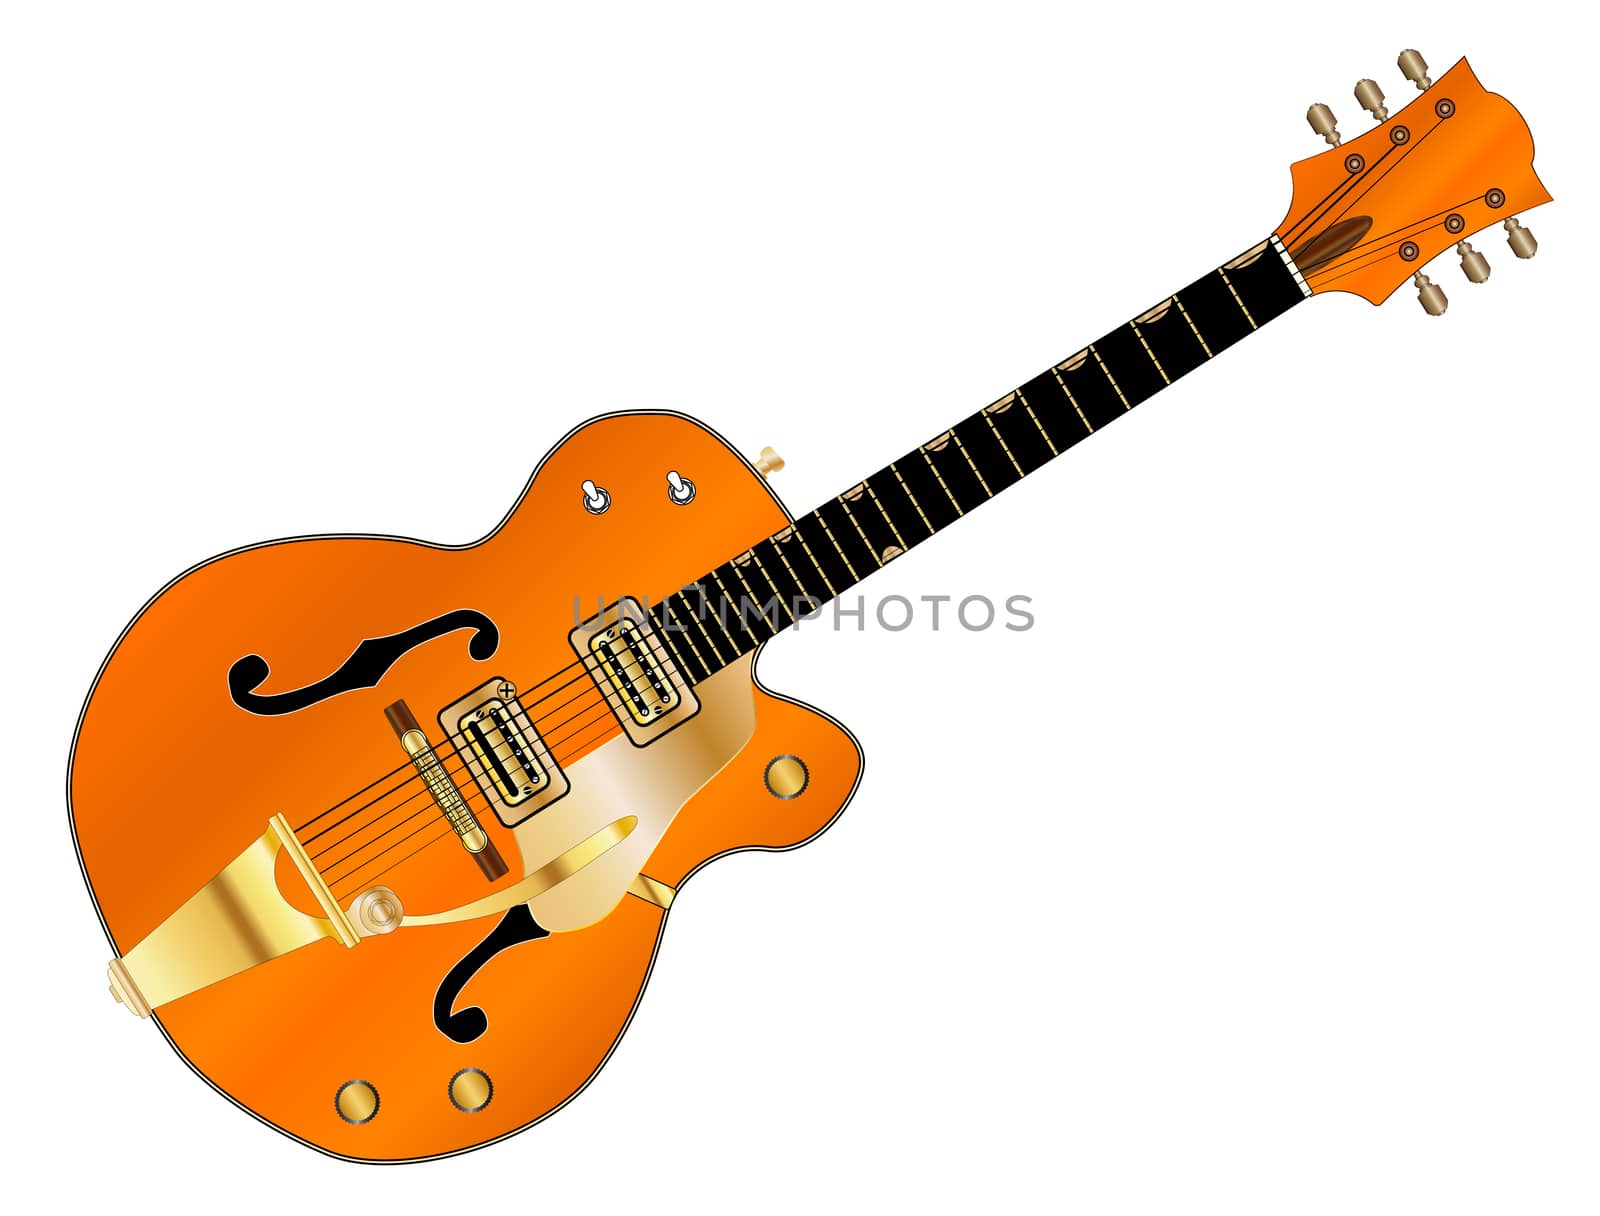 A typical country and western guitar in orange over a white background